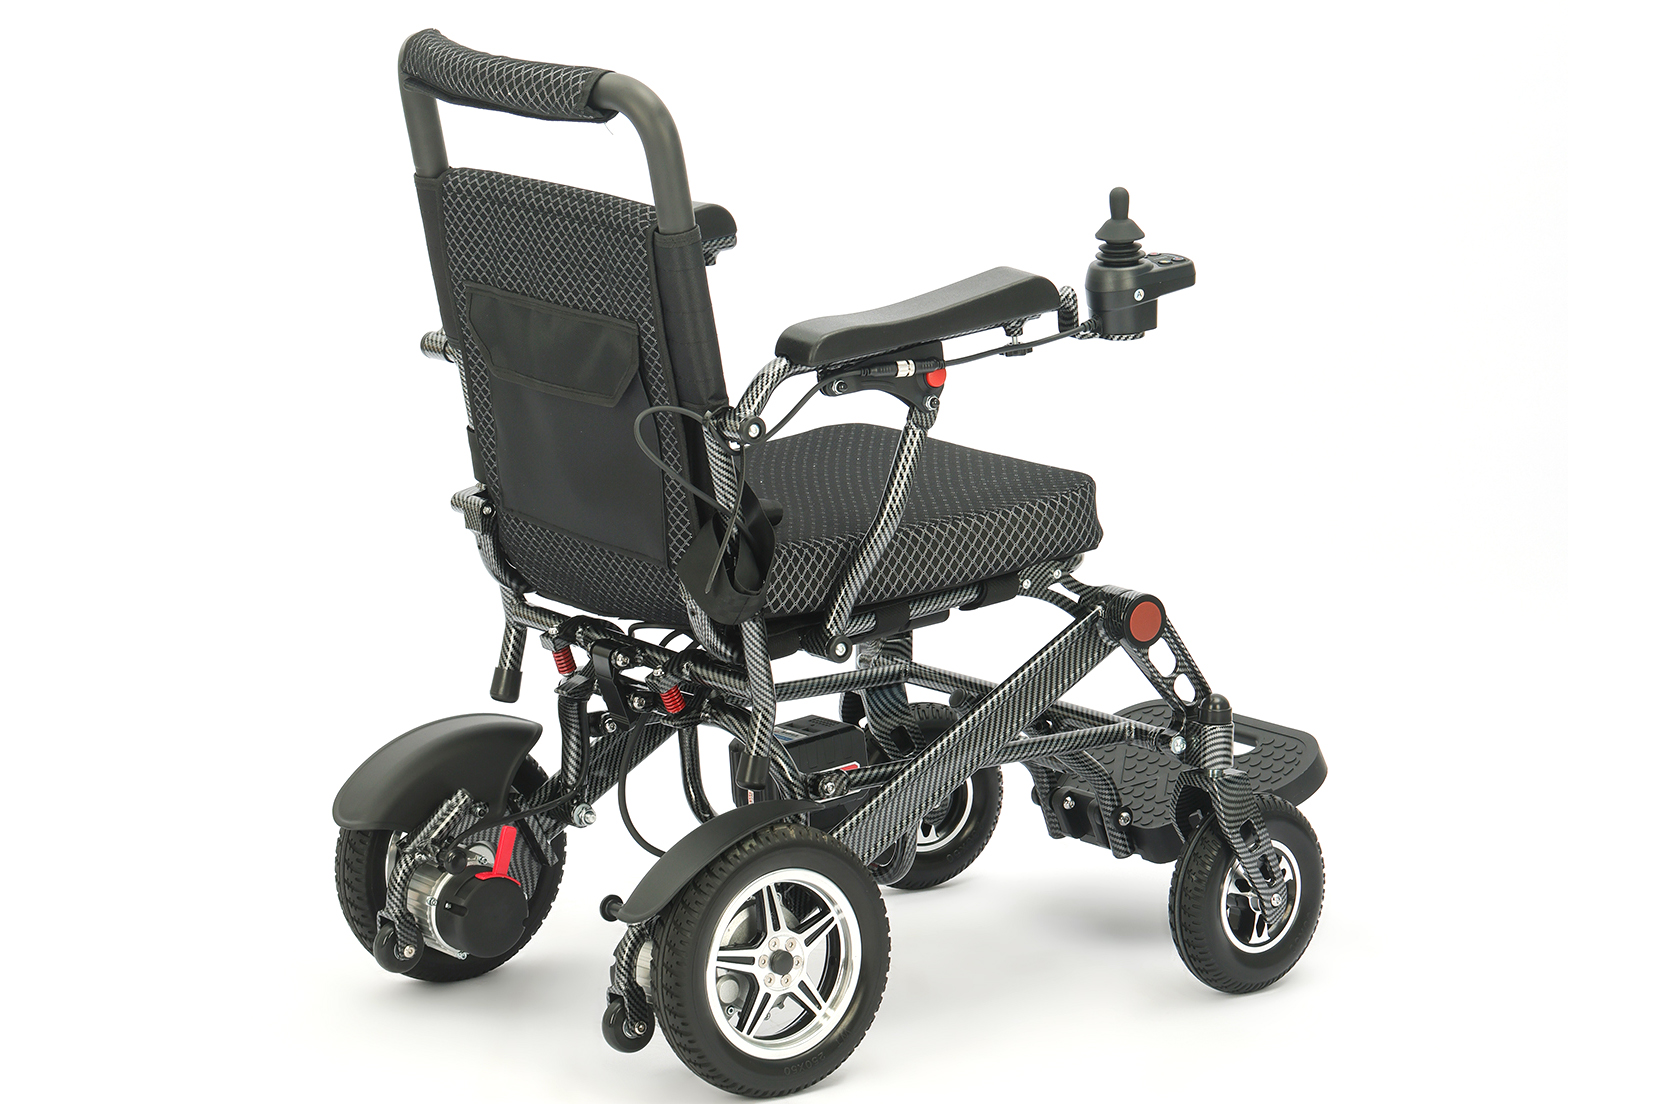 What are the advantages of lightweight electric wheelchairs for the elderly and disabled people with limited mobility?